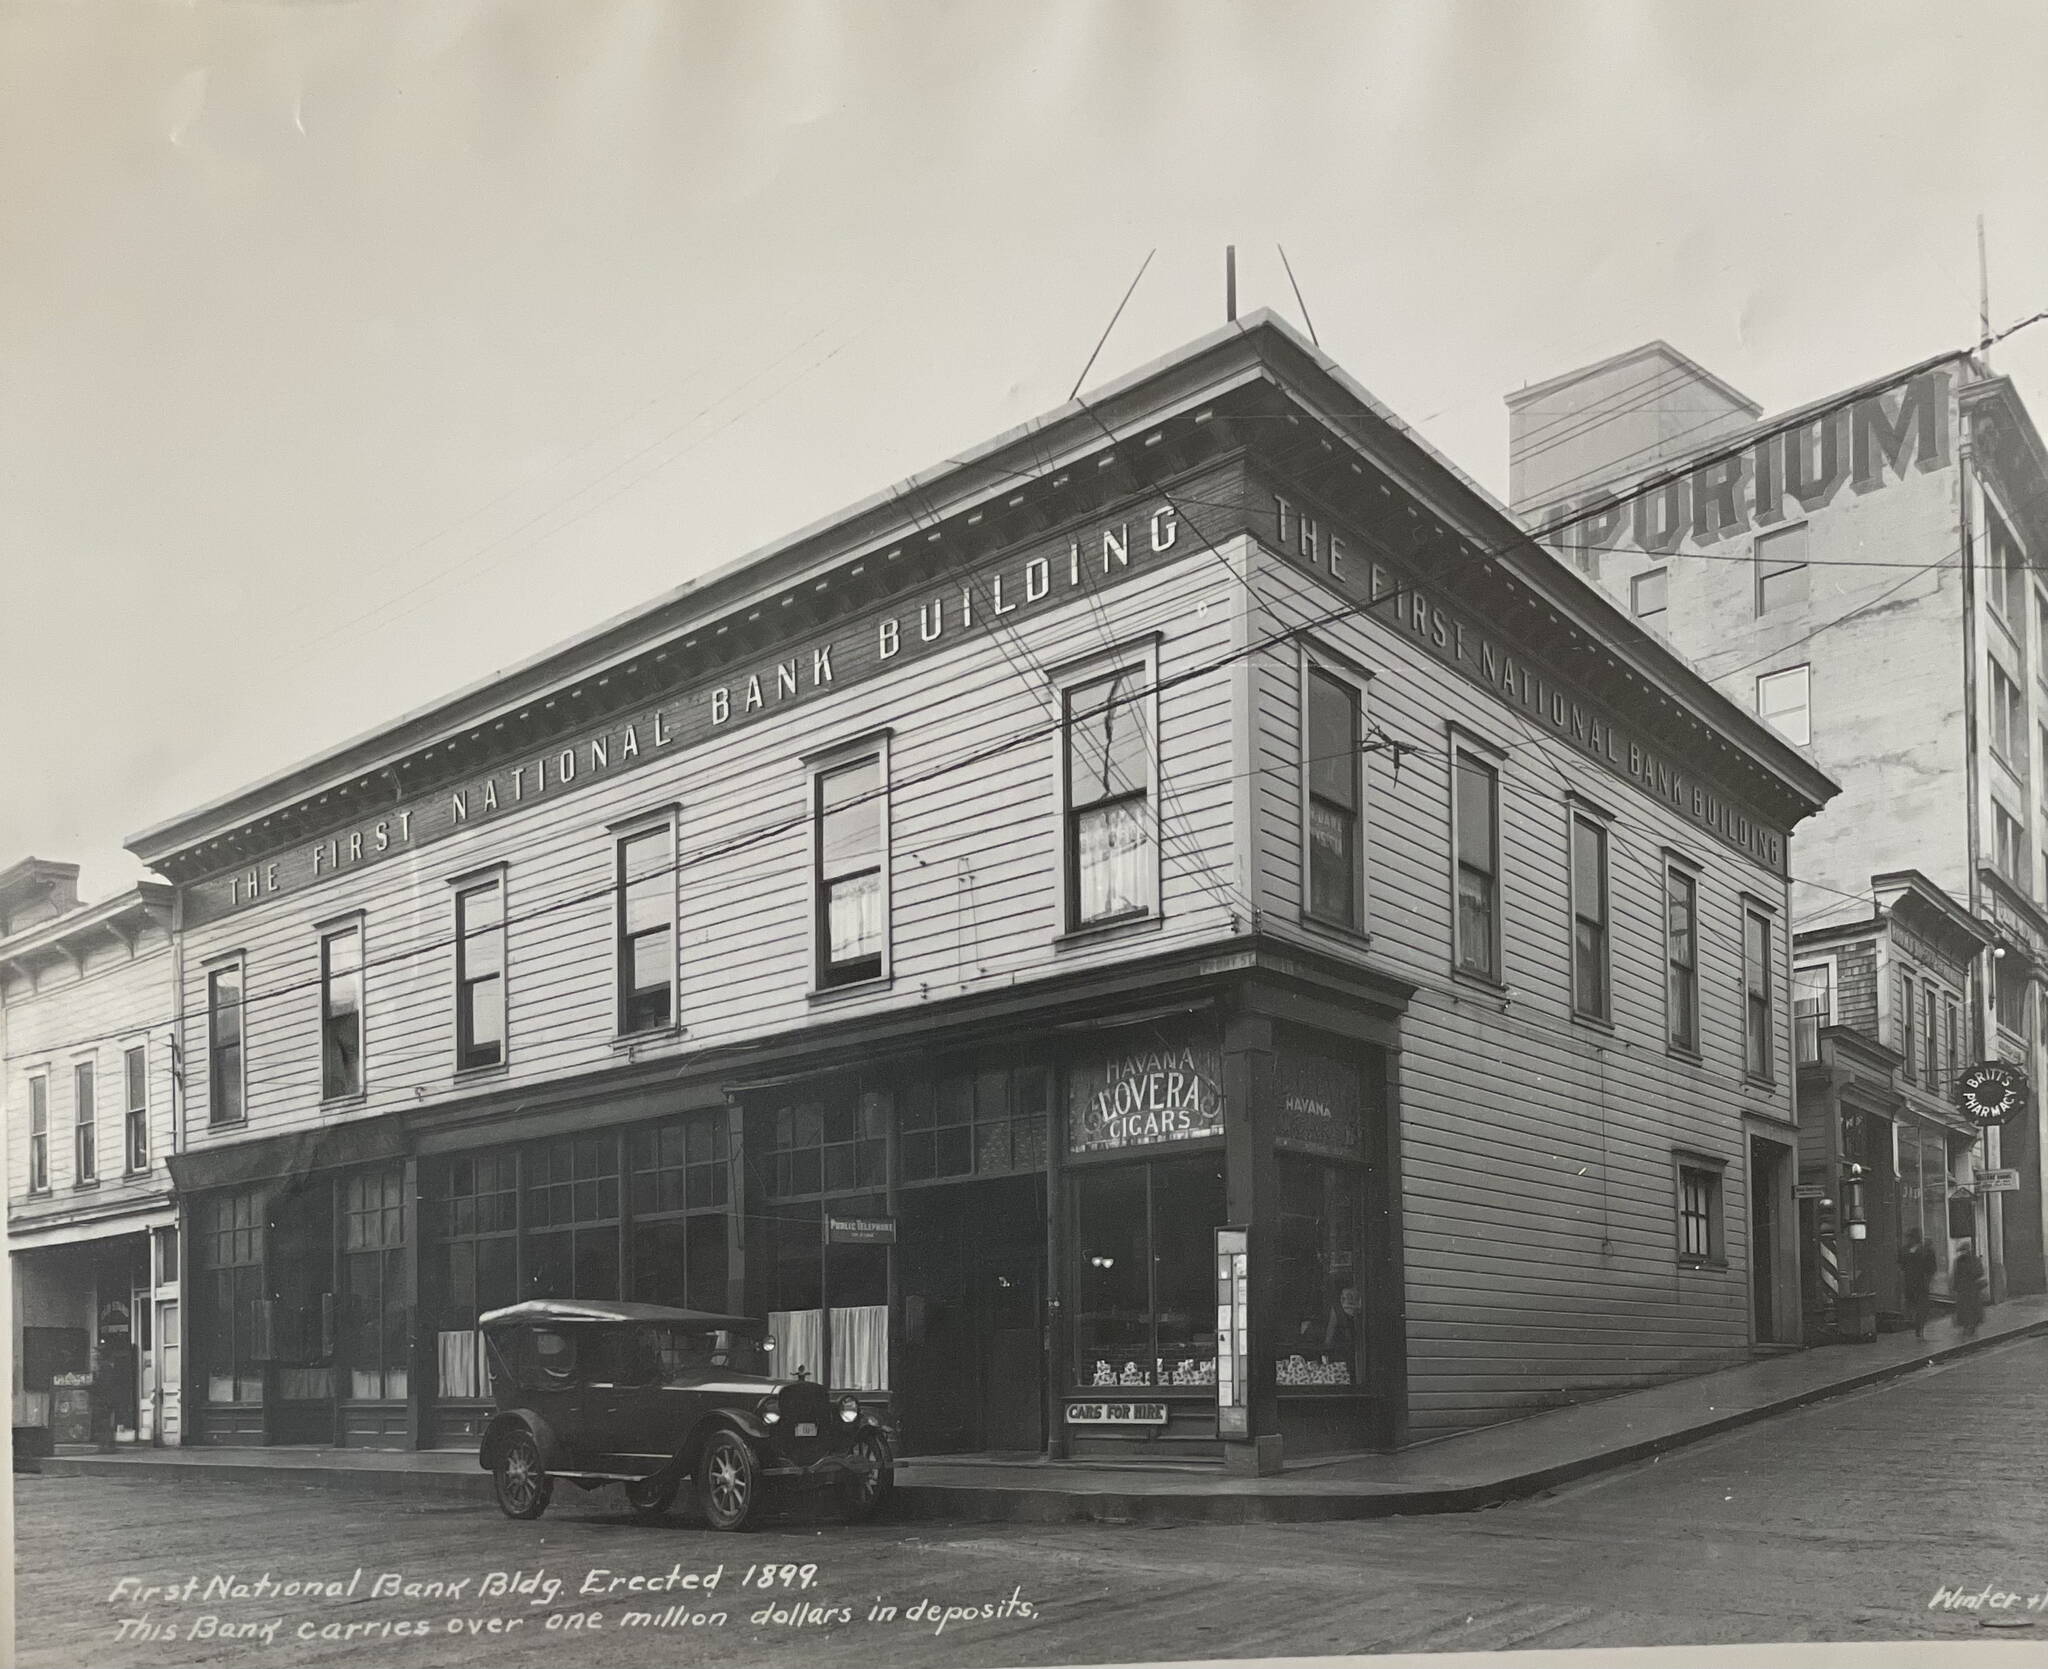 The First National Bank opened in December of 1898 in the Lewis Building at the corner of Front and Seward Streets after a short time in a different location nearby. (Photo credit ASL-P87-0969)